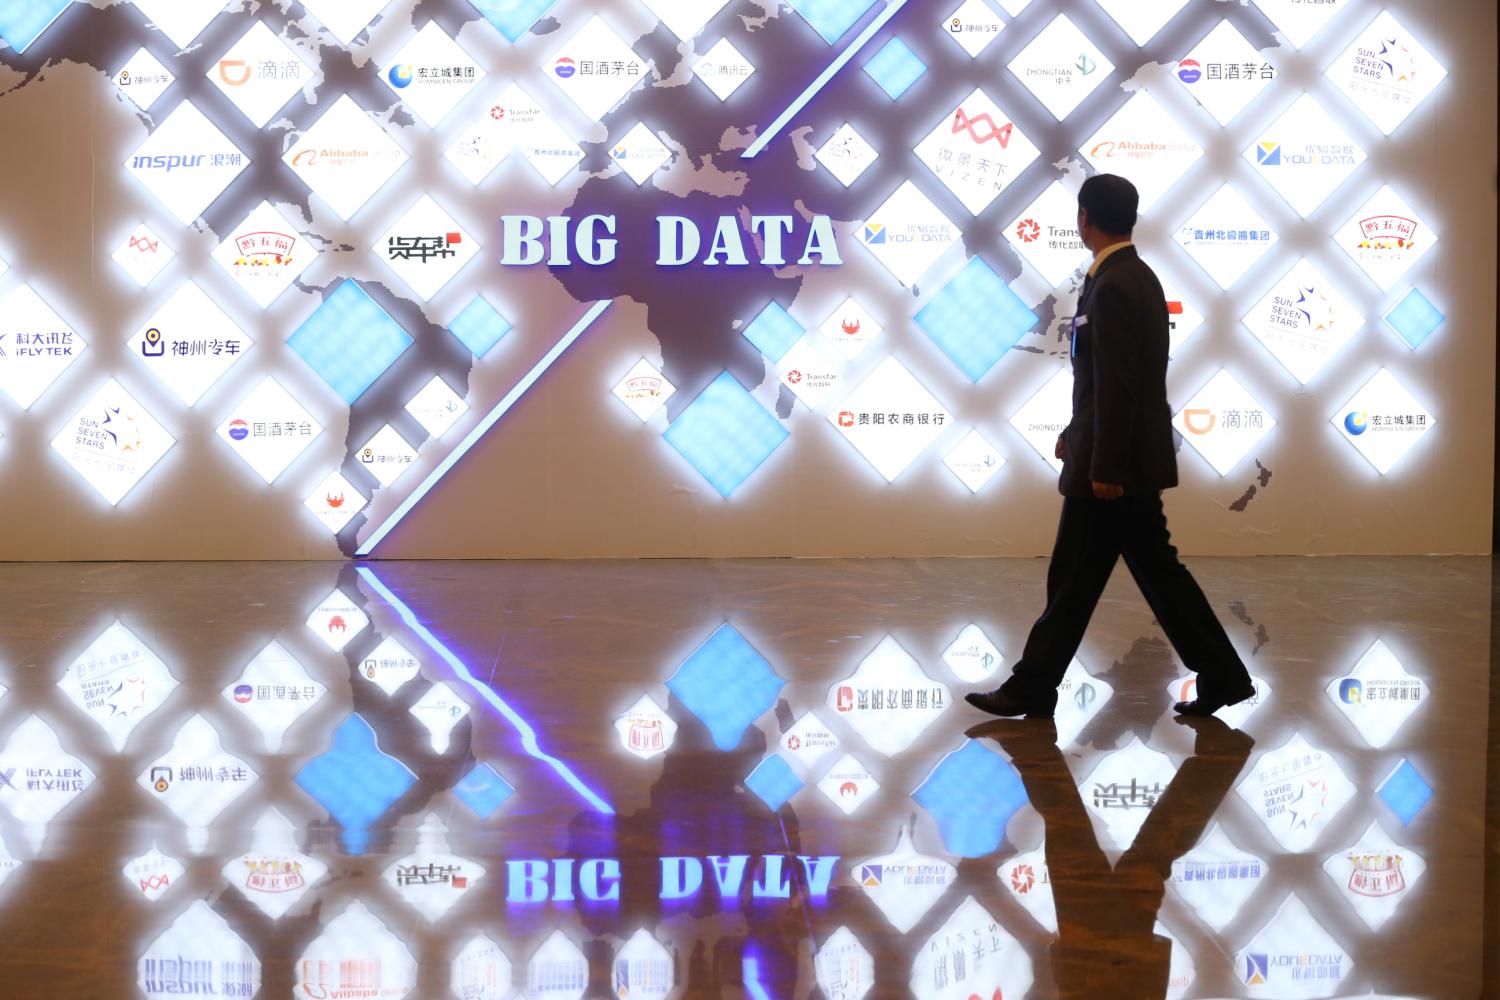 Lit screen at the Big Data Industry Expo in China